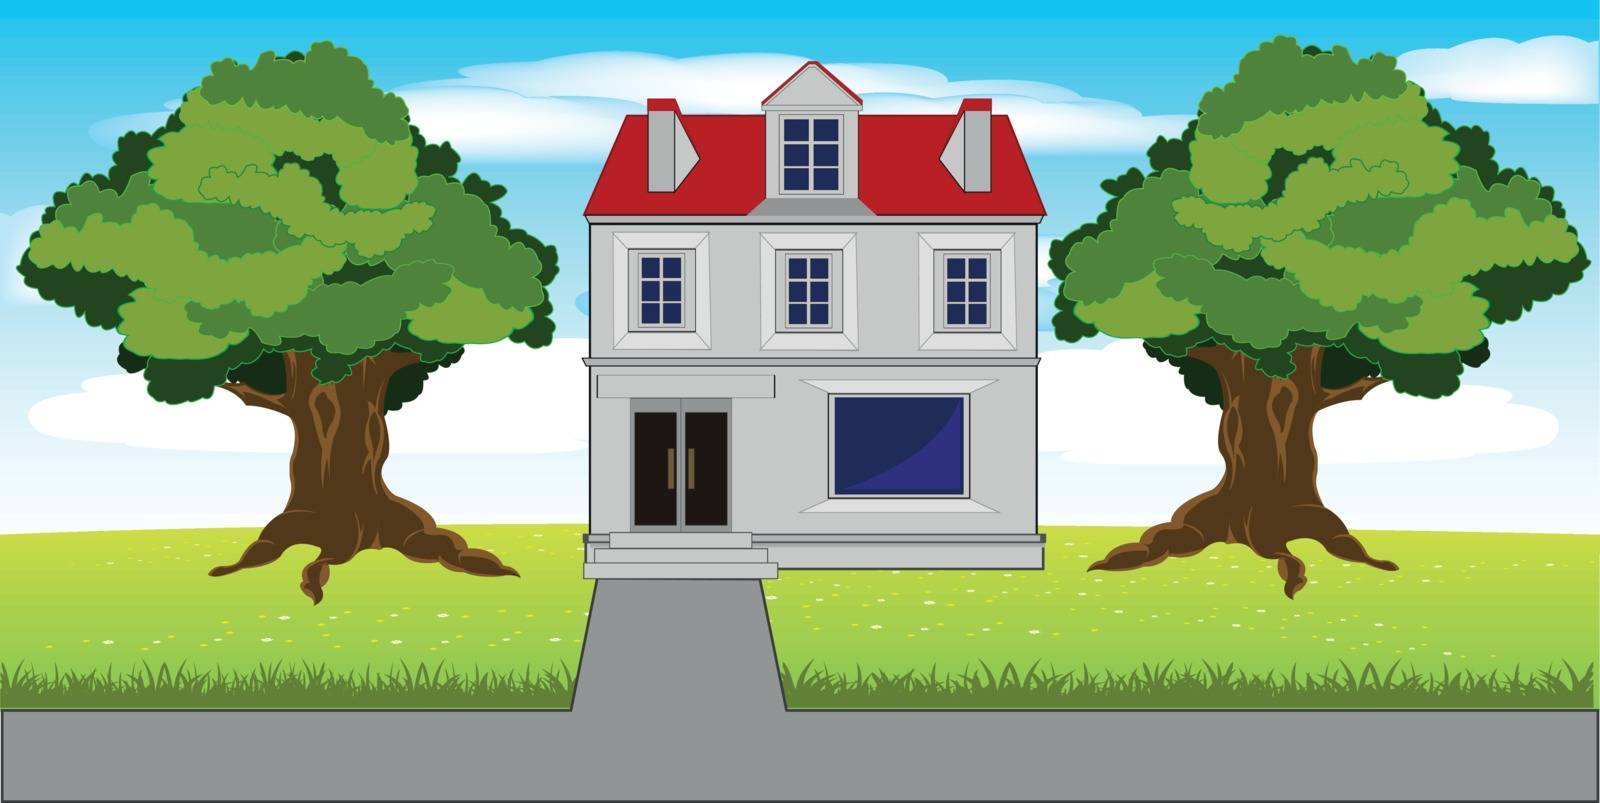 The Big house on glade and road.Vector illustration